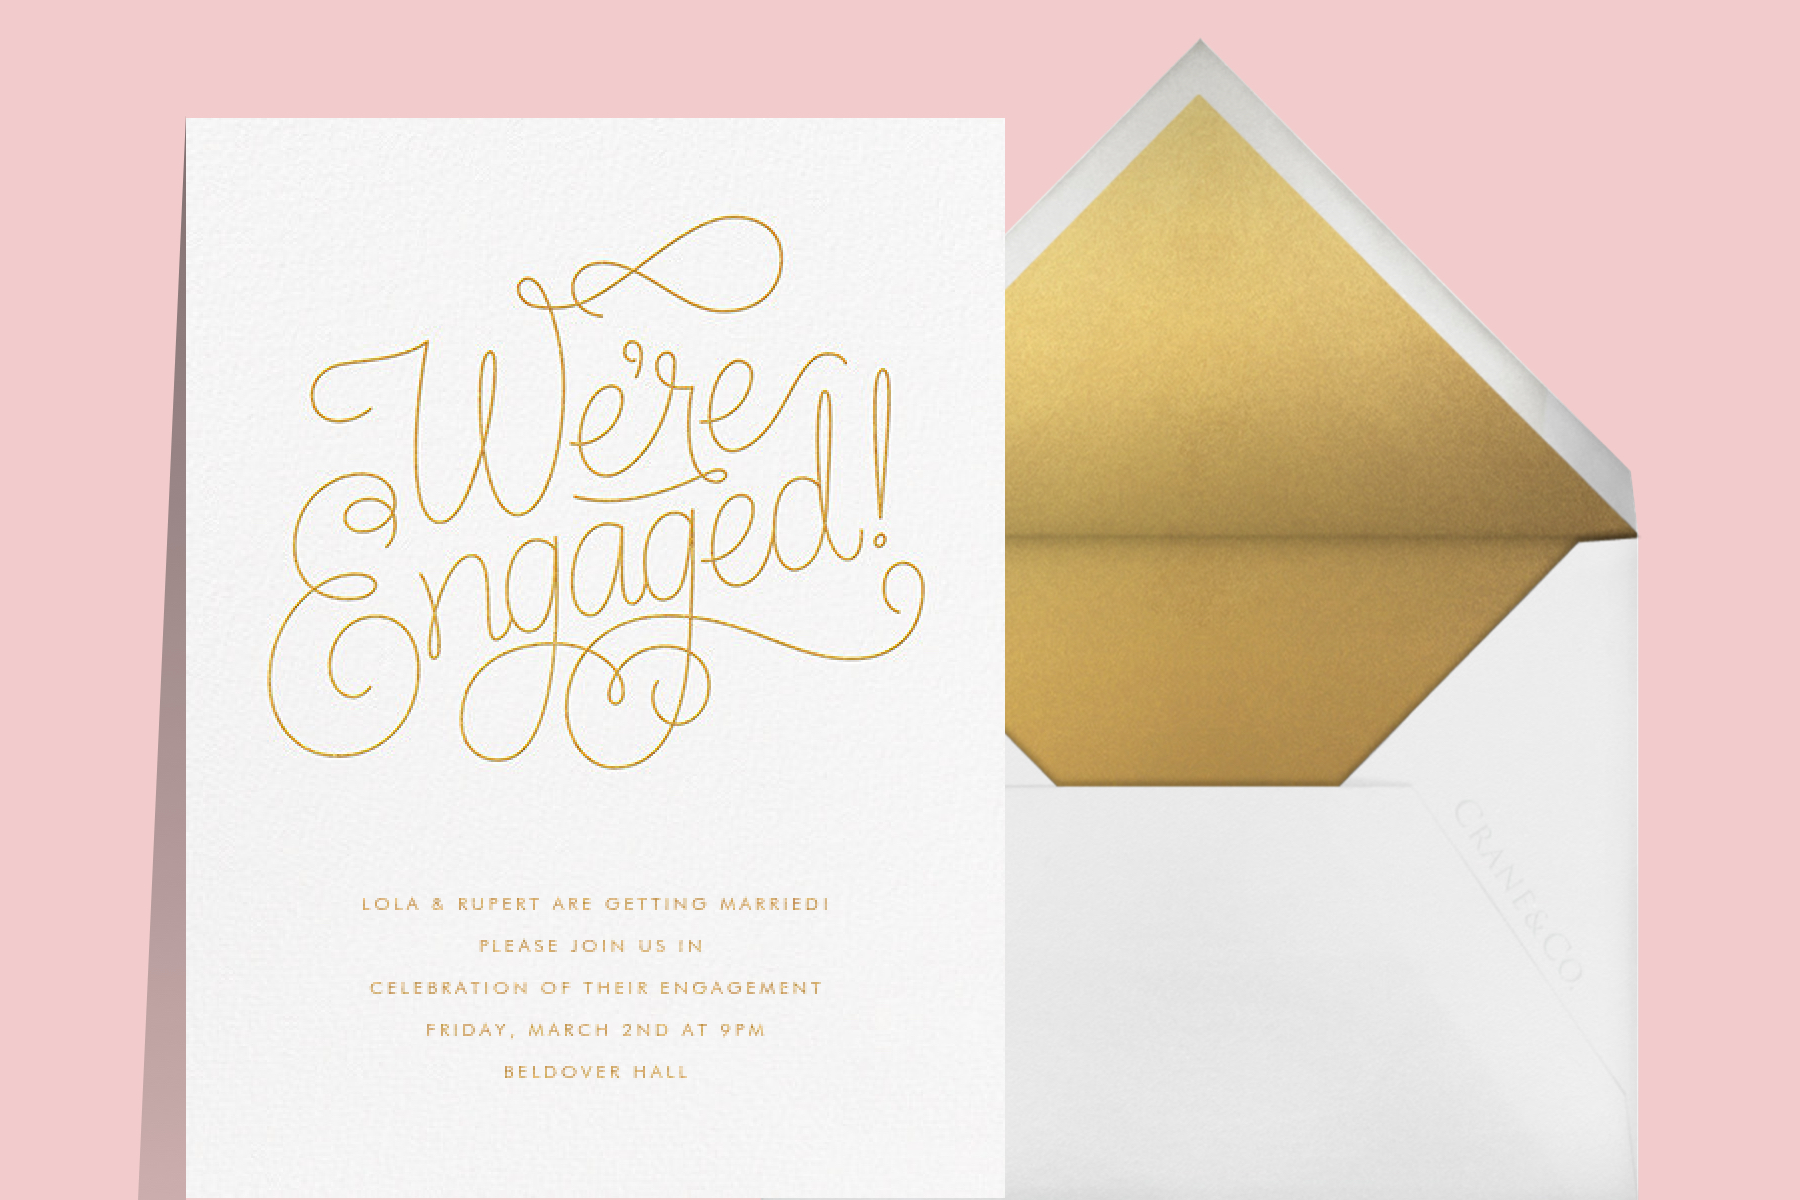 "Bobbin I - Engagement (Gold)" by Paperless Post